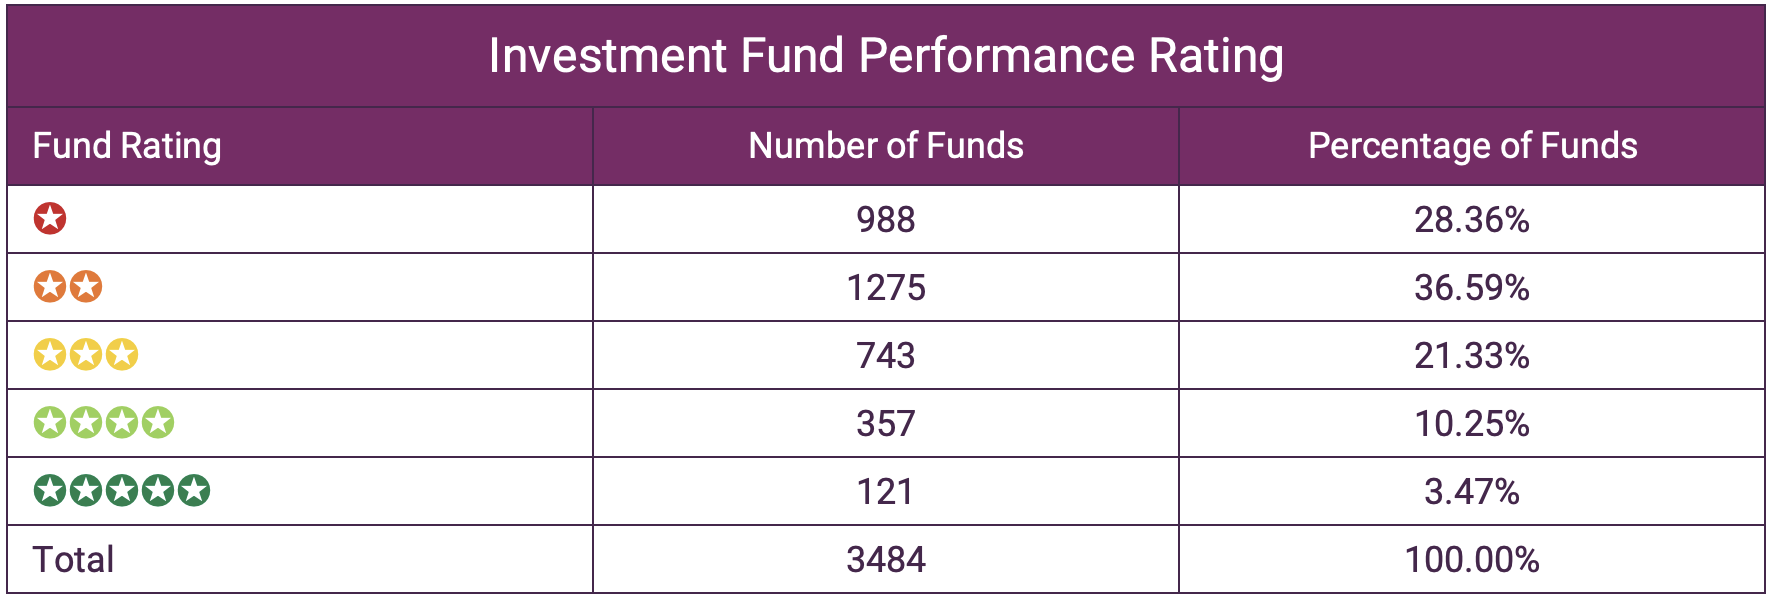 Investment fund performance rating